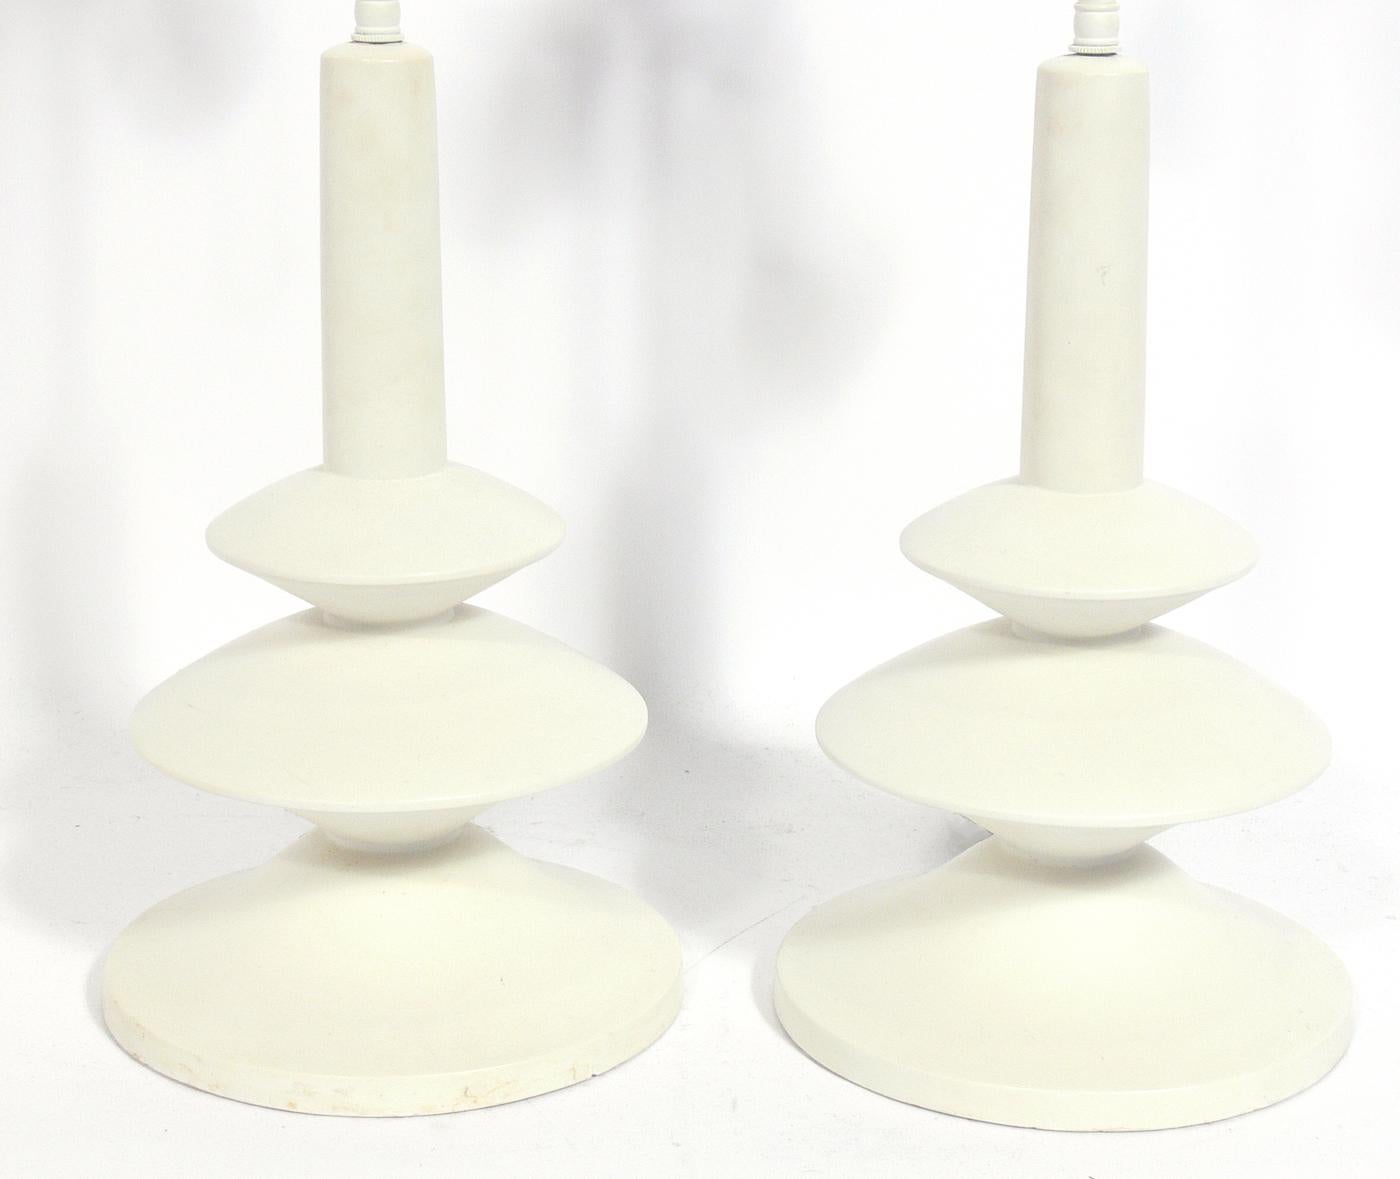 Pair of sculptural white plaster lamps in the manner of Alberto and Diego Giacometti for Jean Michel Frank, made by Sirmos, circa 1960s. Very sculptural forms. They have been rewired and are ready to use. Price noted in this listing is for the pair